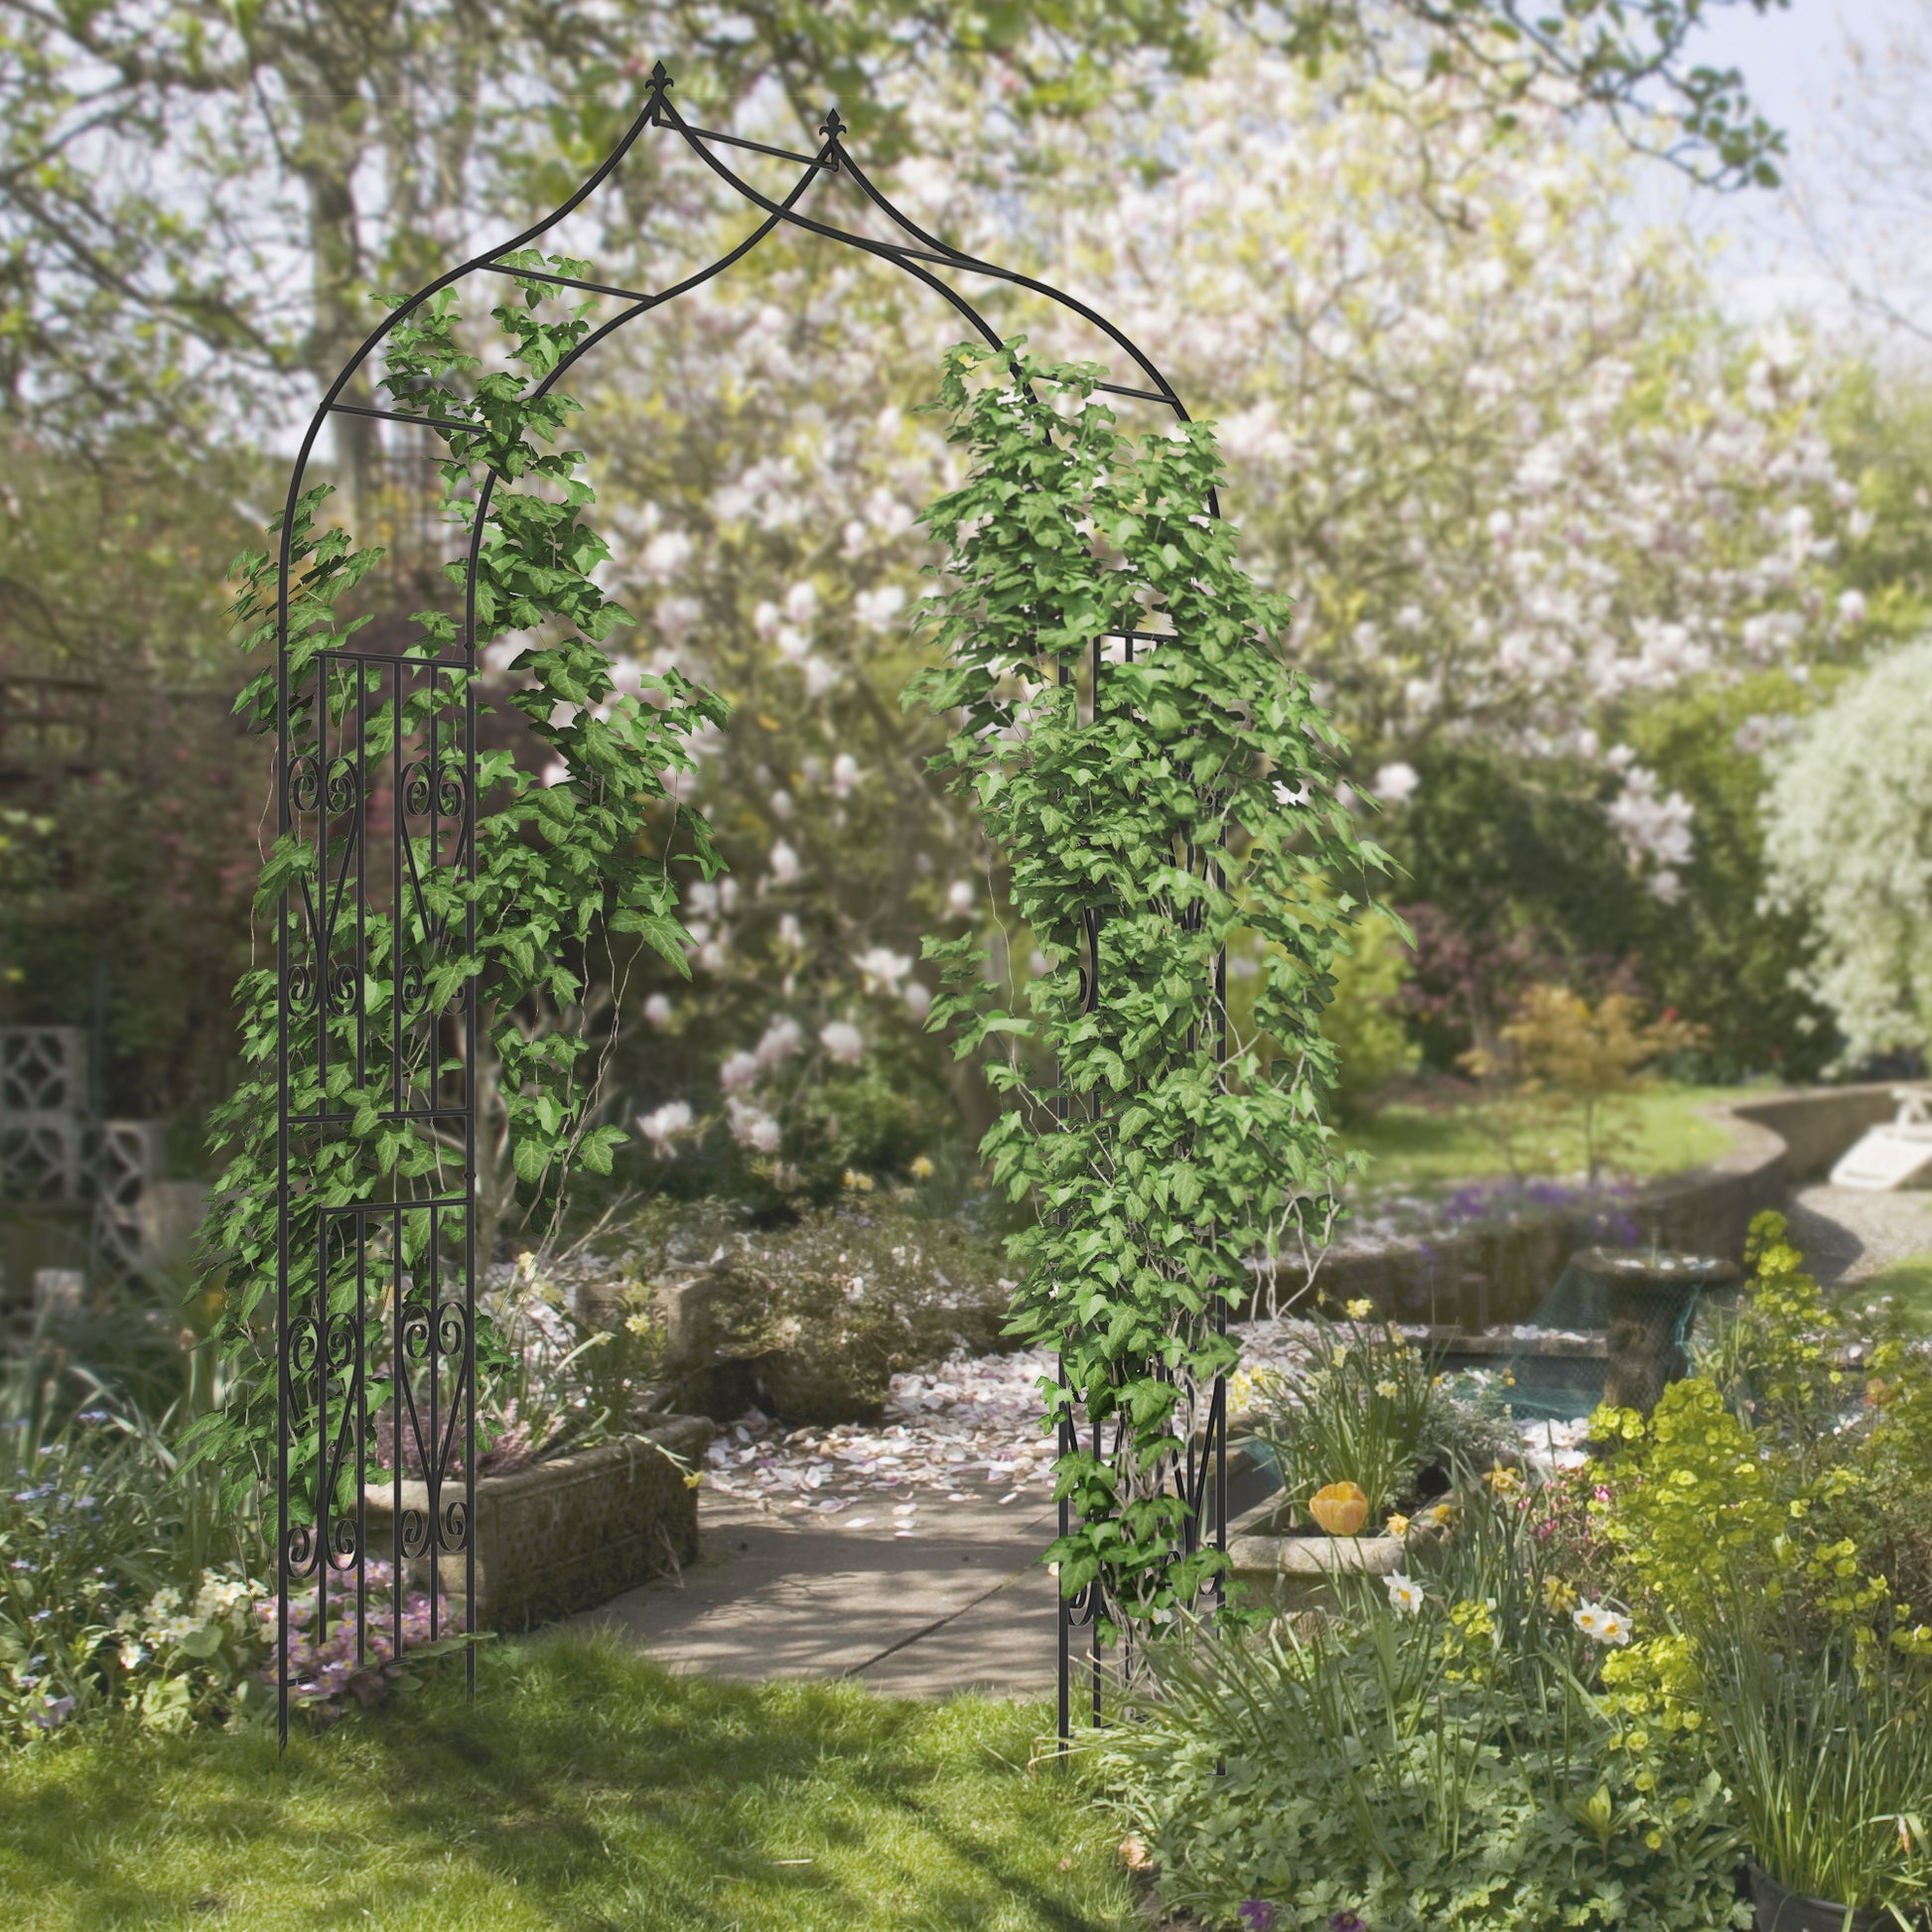 8.7FT Garden Arch Trellis, Outdoor Wedding Arbor for Ceremony with Scrollwork Design for Climbing Roses, Vines and Plants at Gallery Canada